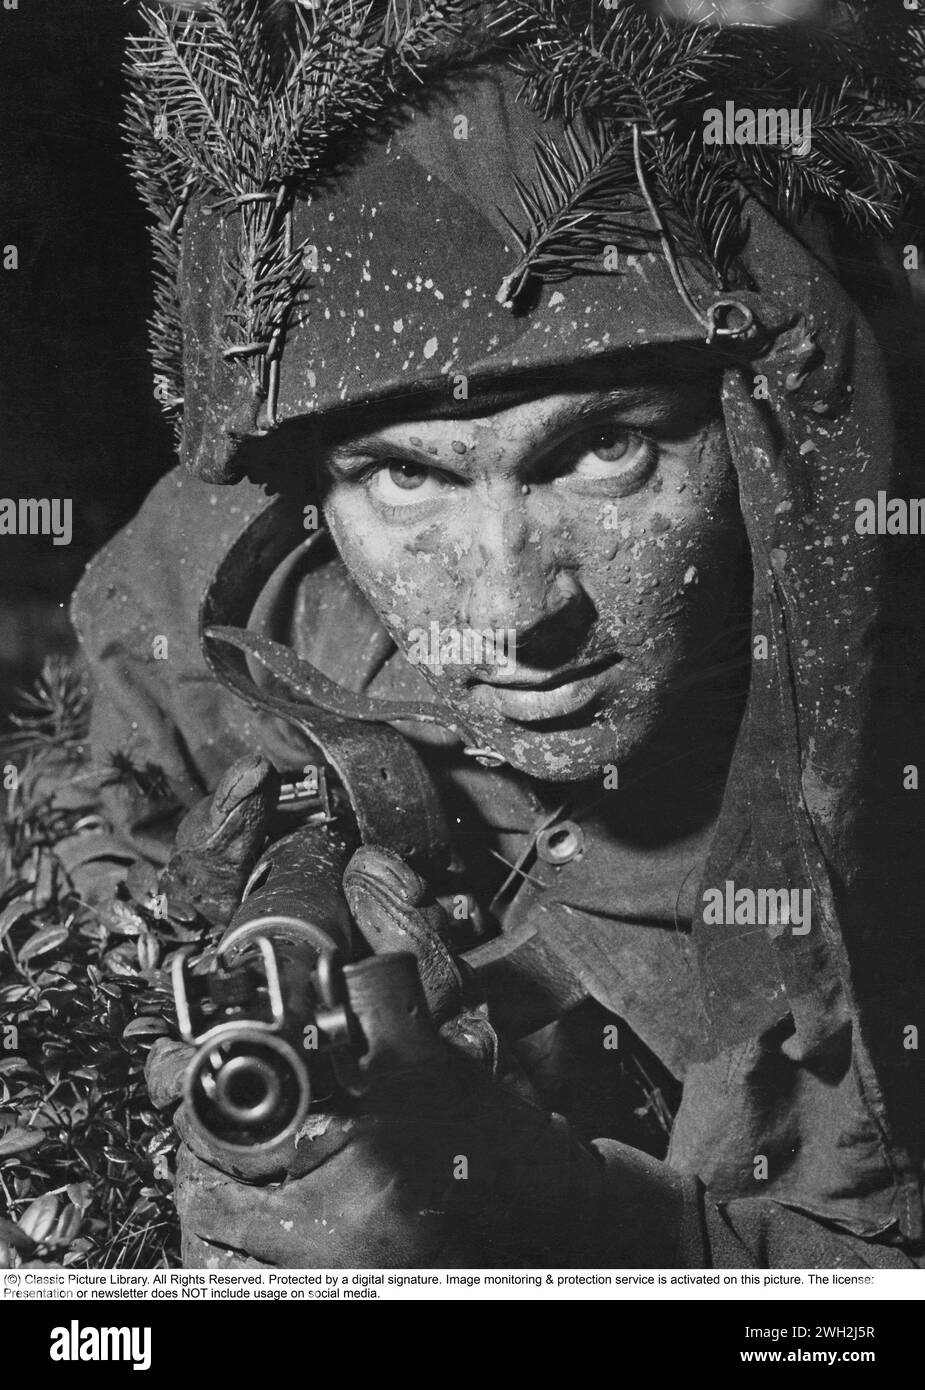 Swedish soldier in the 1950s. A young man during a military exercise has camouflaged himself well with fir branches in his helmet. He has a loaded submachine gun in his hands and is ready for battle. In 1945, Sweden introduced the 9 mm Parabellum Carl Gustaf m/45 with a design borrowing from and improving on many design elements of earlier submachine-gun designs. It has a tubular stamped steel receiver with a side folding stock. The m/45 was widely exported, and especially popular with CIA operatives and U.S. Special Forces during the Vietnam War. In U.S. service it was known as the 'Swedish-K Stock Photo